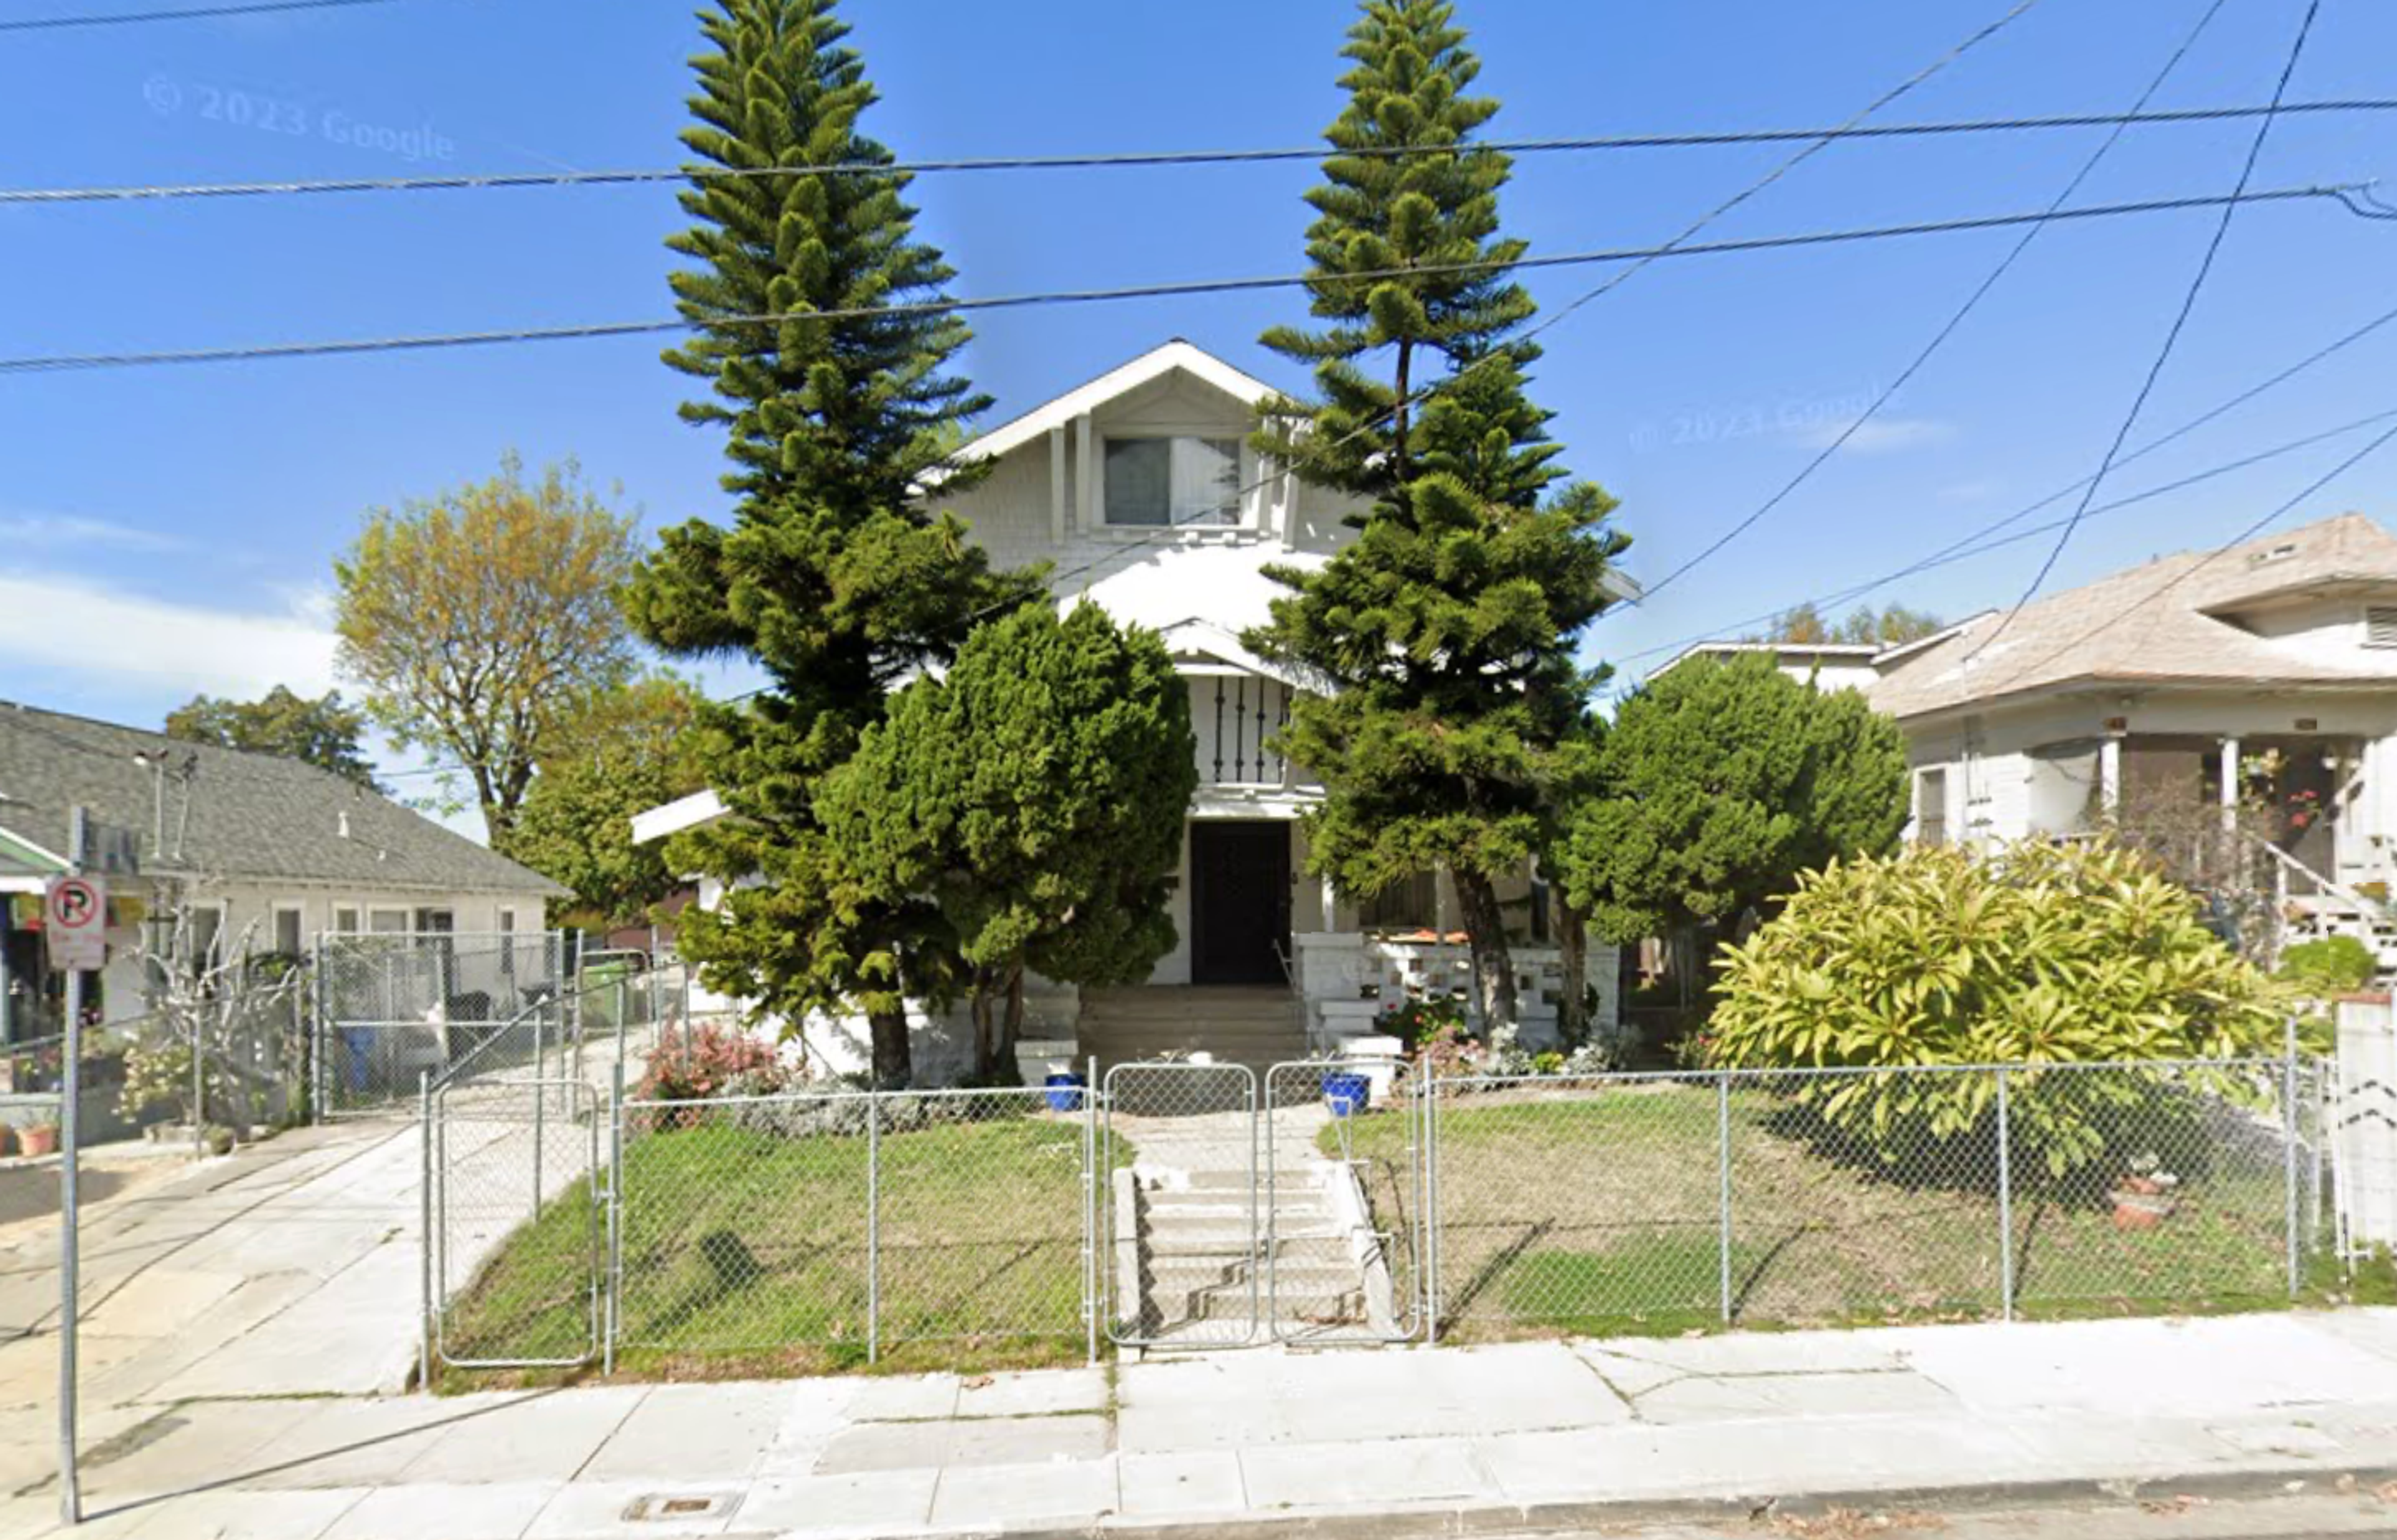 Google Maps screenshot of 425 N. Lake Street, a two-story white Craftsman house flanked by mature trees, before the fire